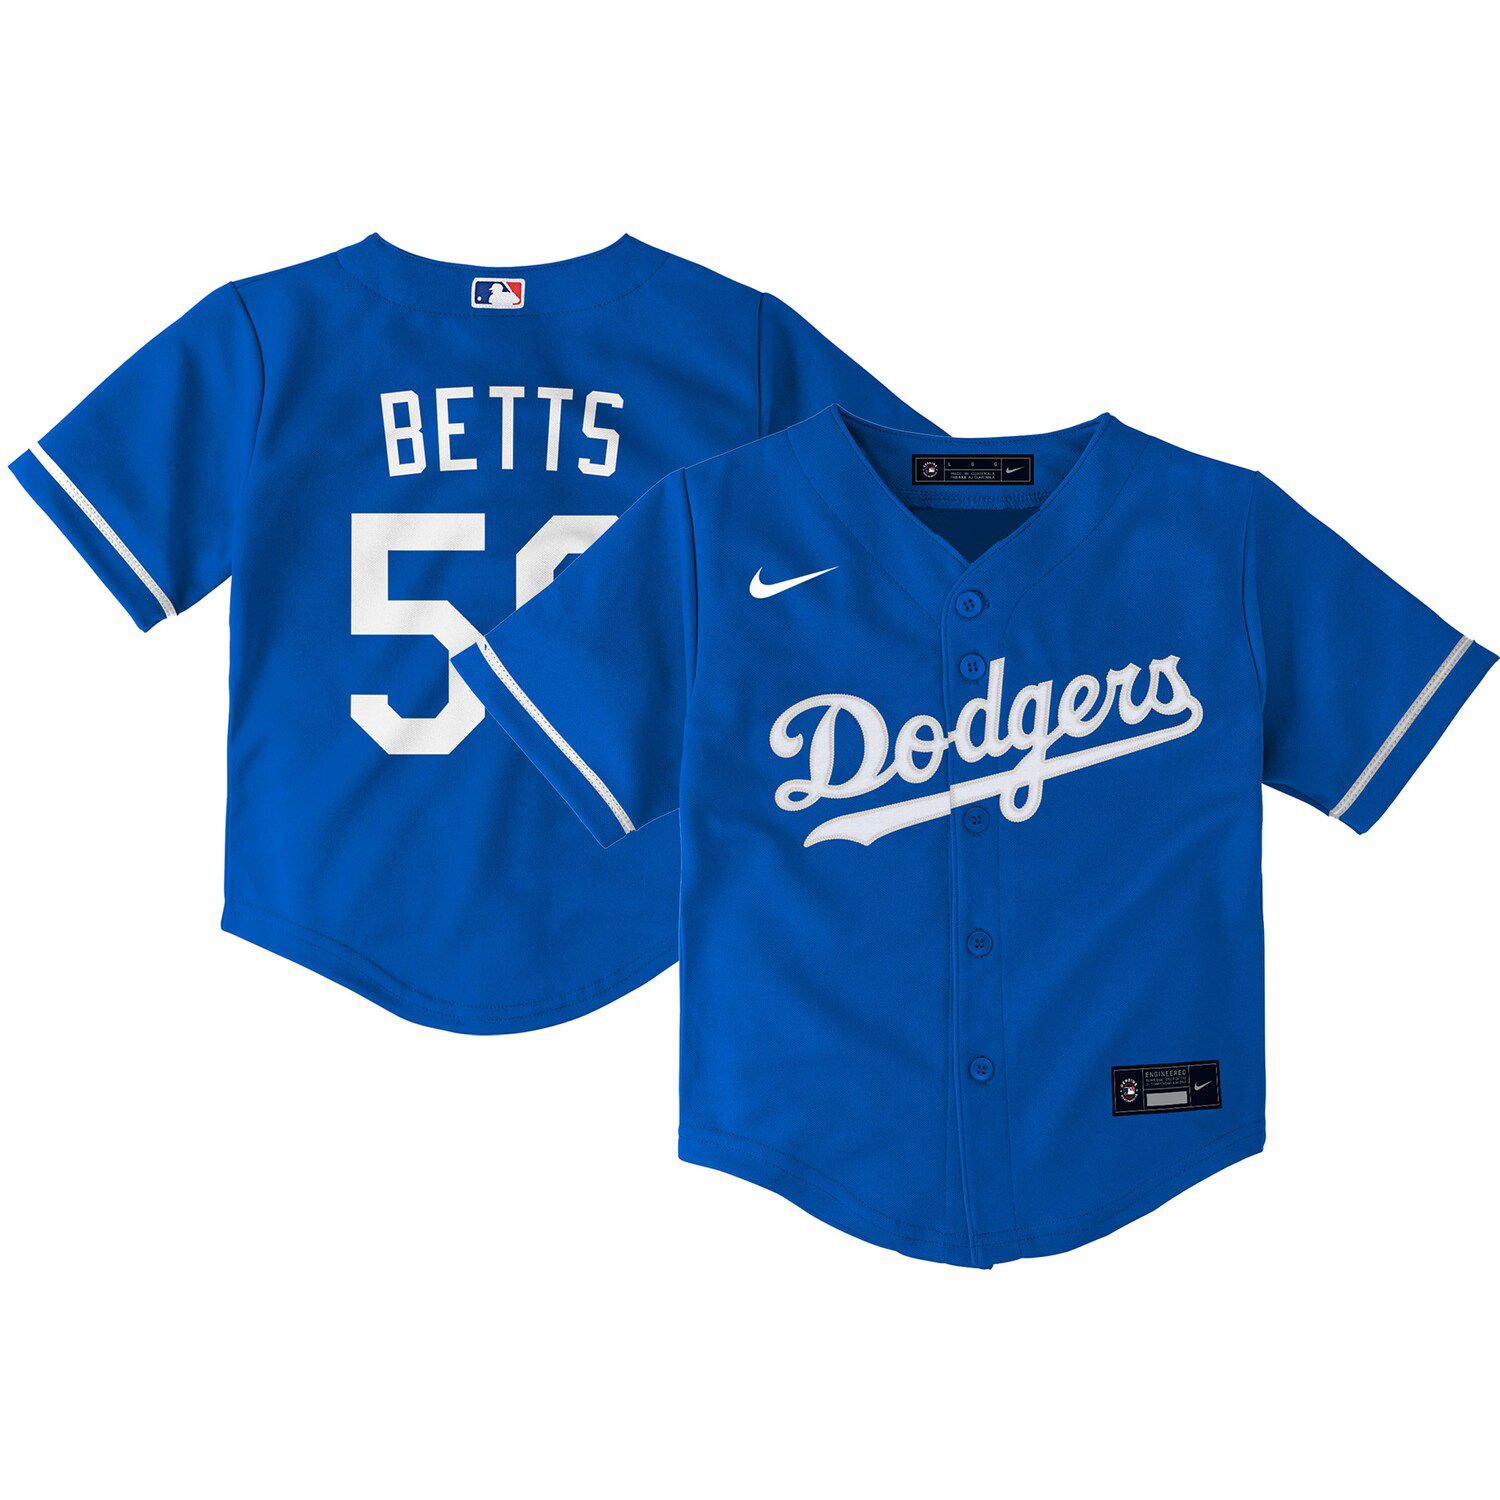 mookie betts jersey youth dodgers